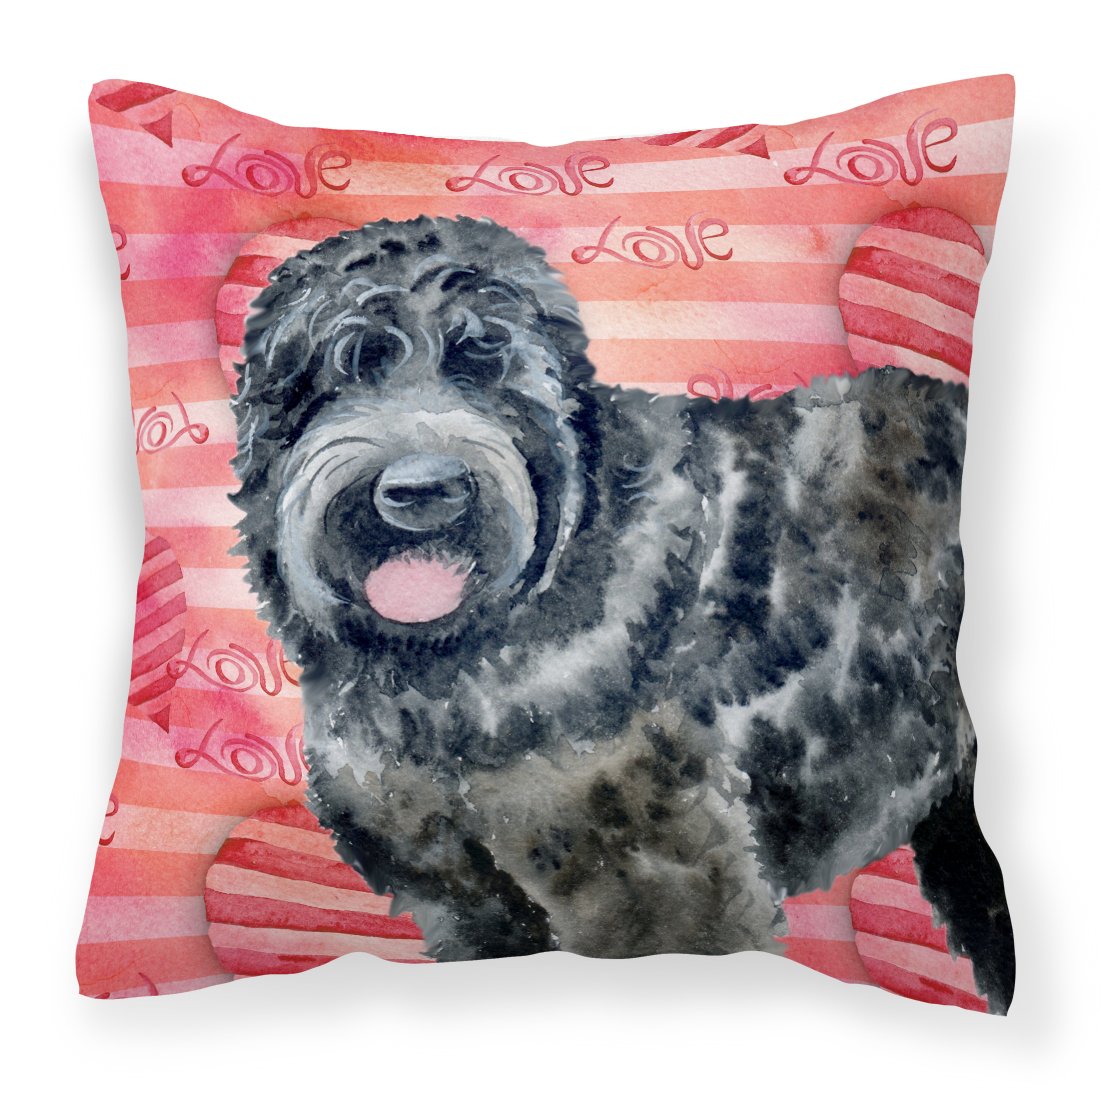 Black Russian Terrier Love Fabric Decorative Pillow BB9764PW1818 by Caroline's Treasures